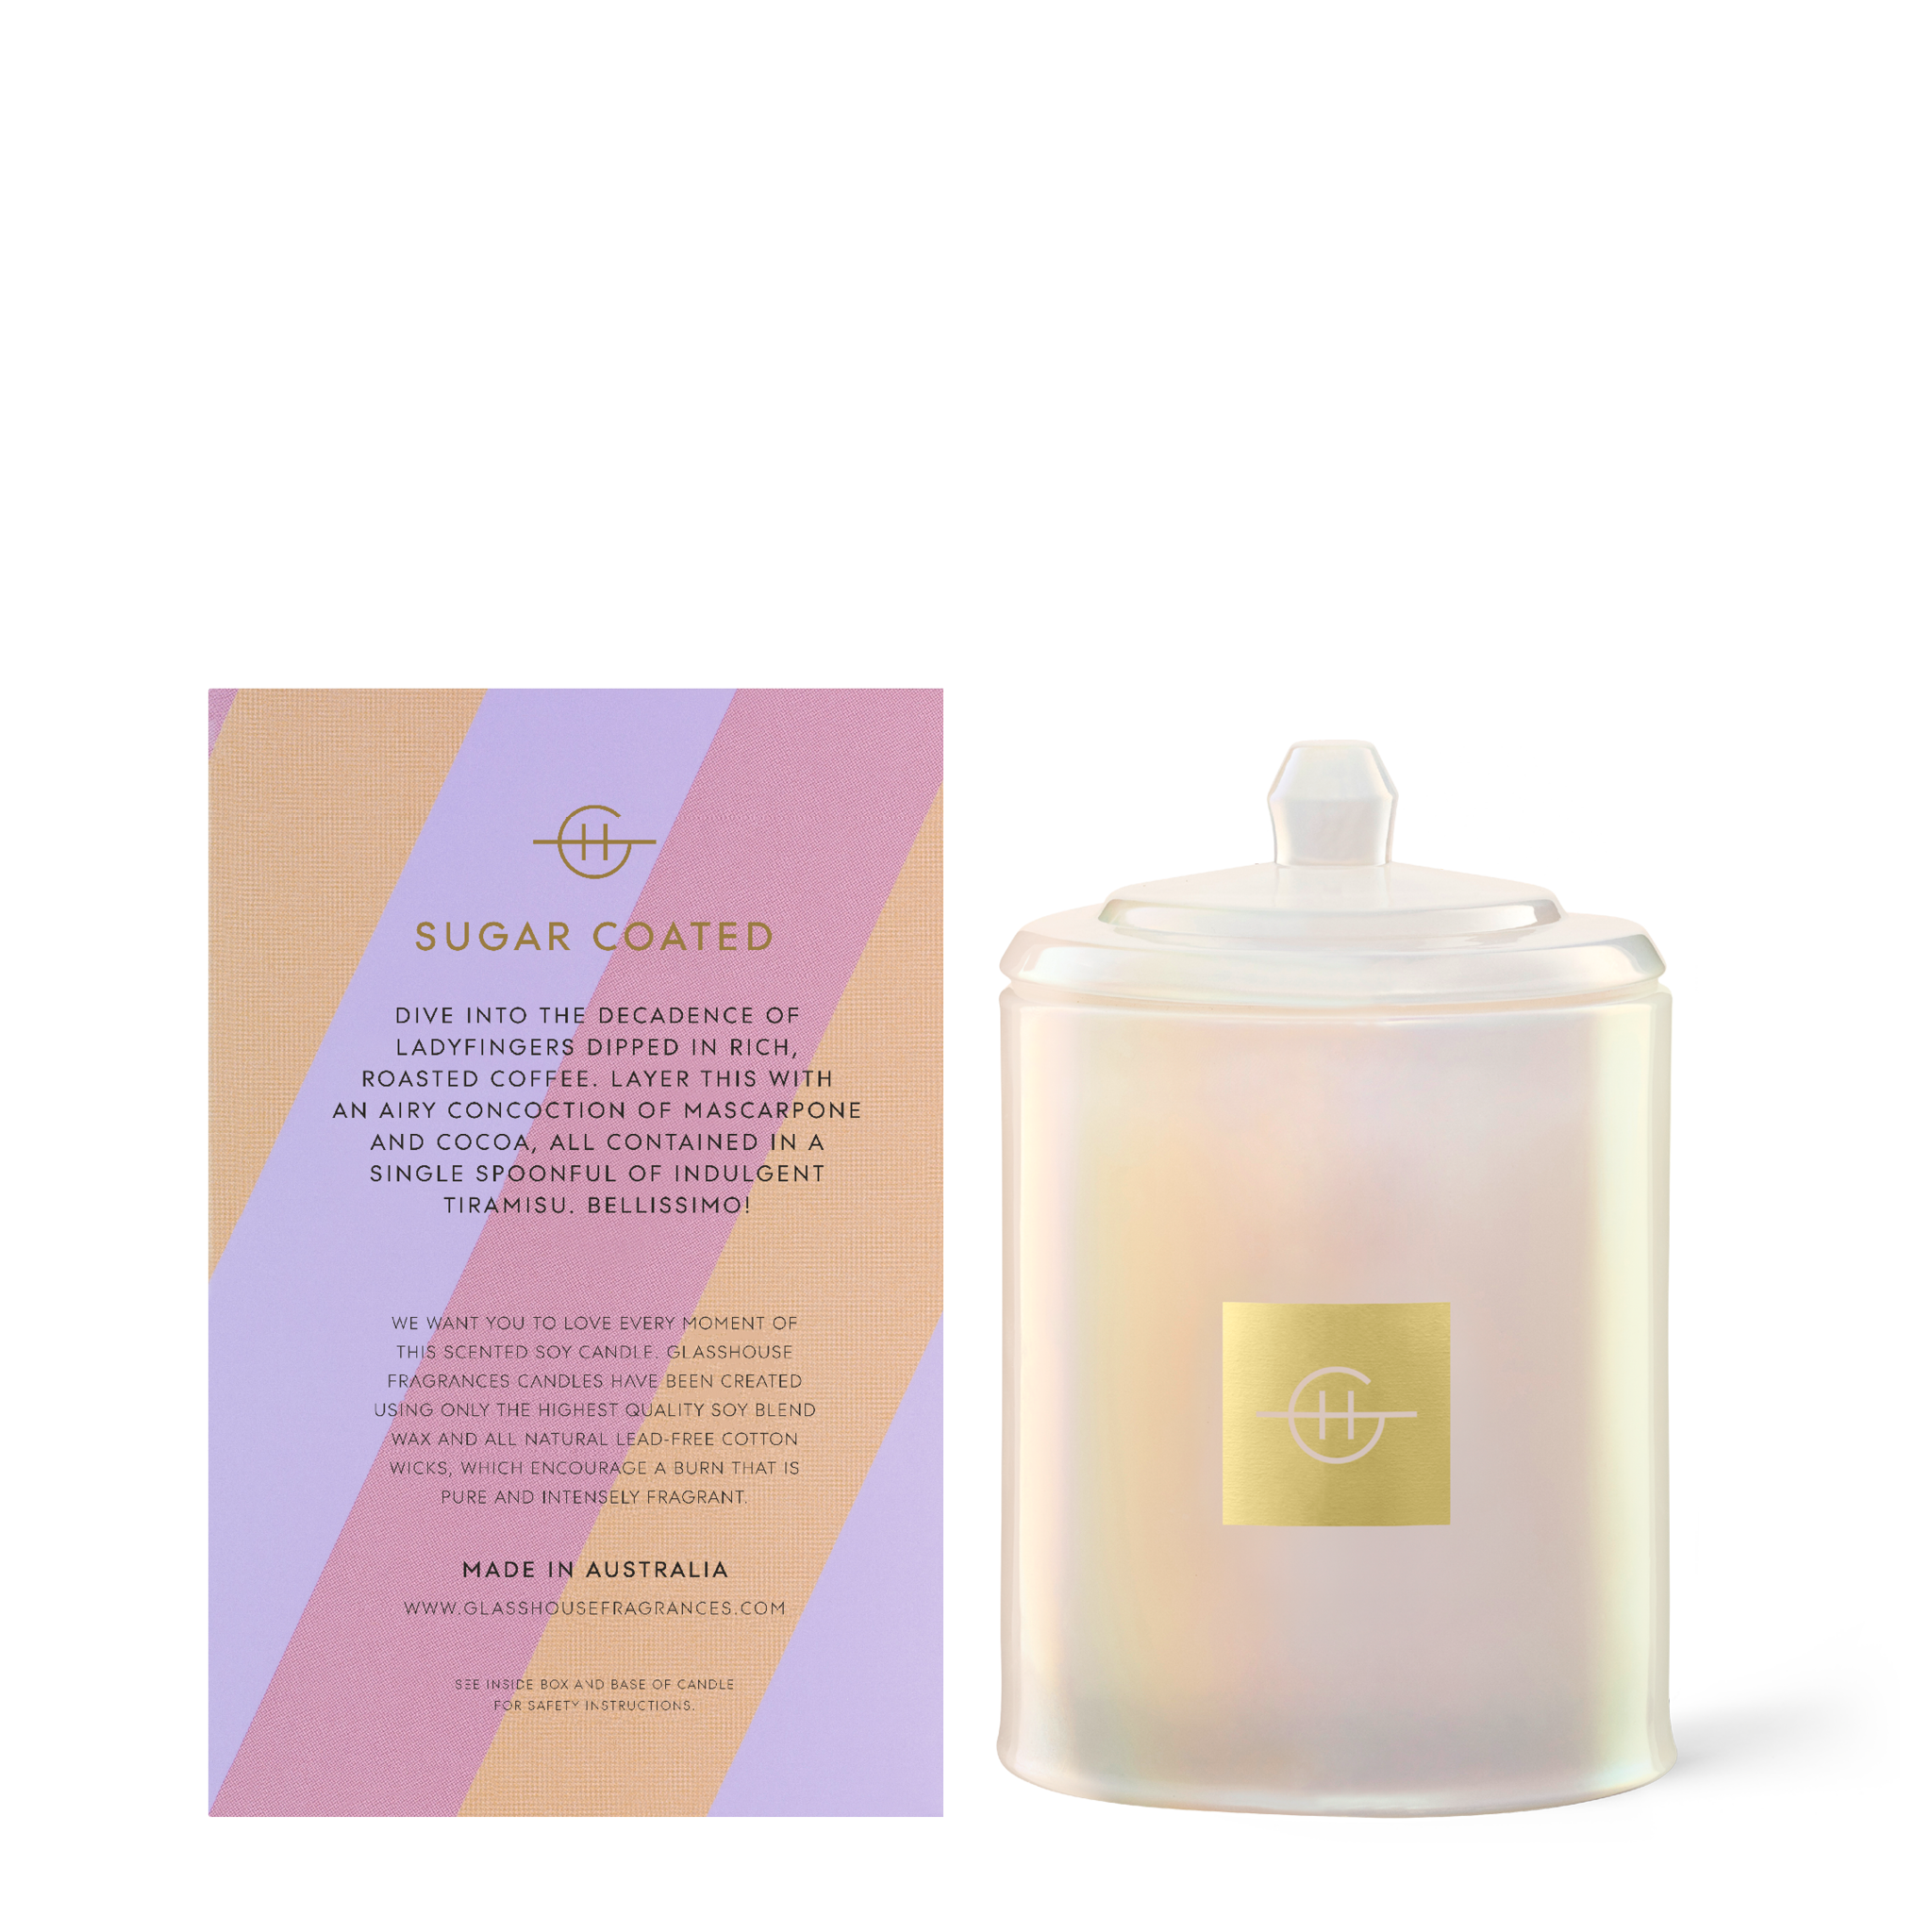 Glasshouse Fragrances Eager For Espresso 380g Soy Candle back of product